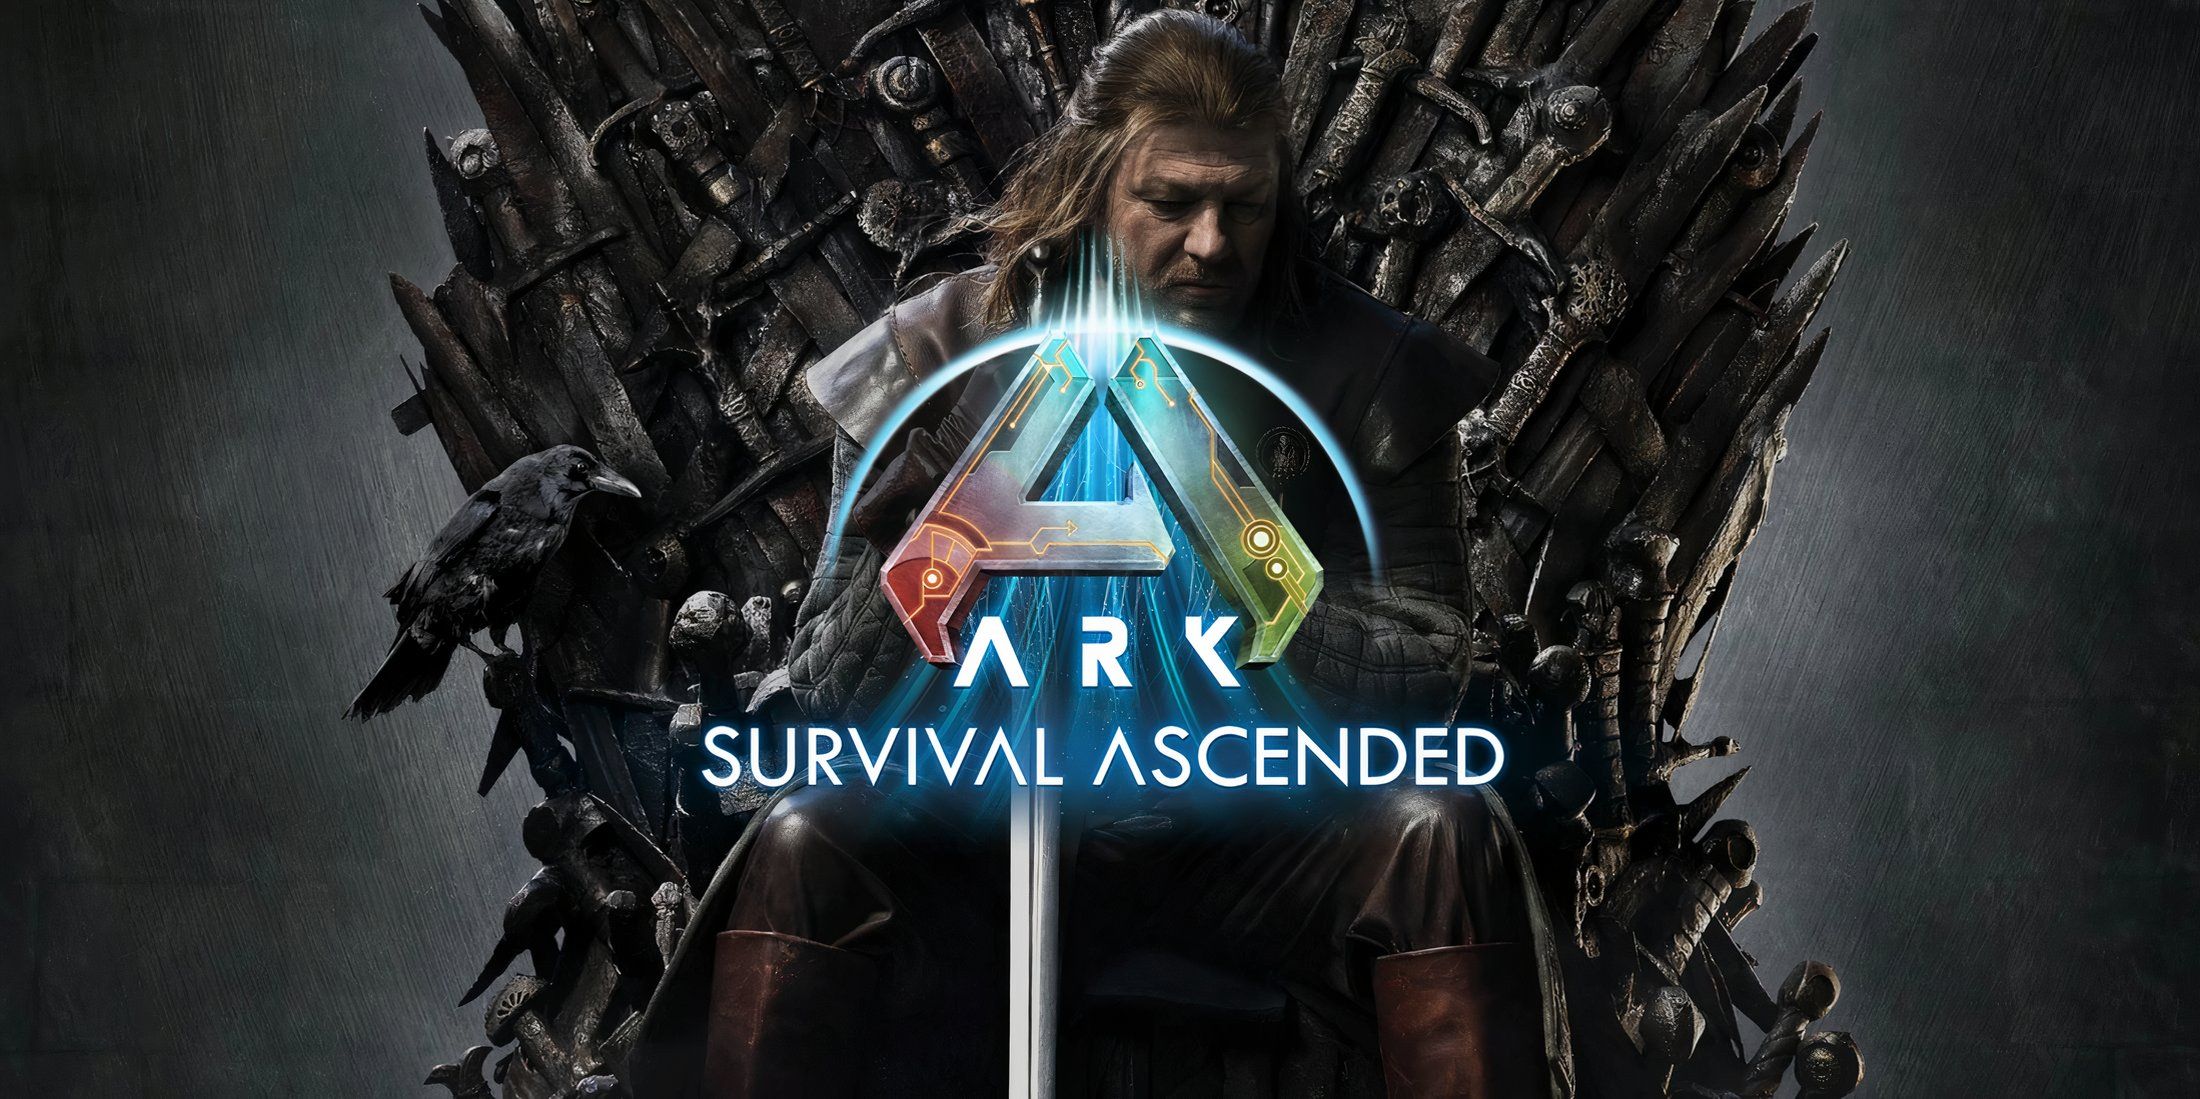 ARK: Survival Ascended and Game of Thrones Wallpaper